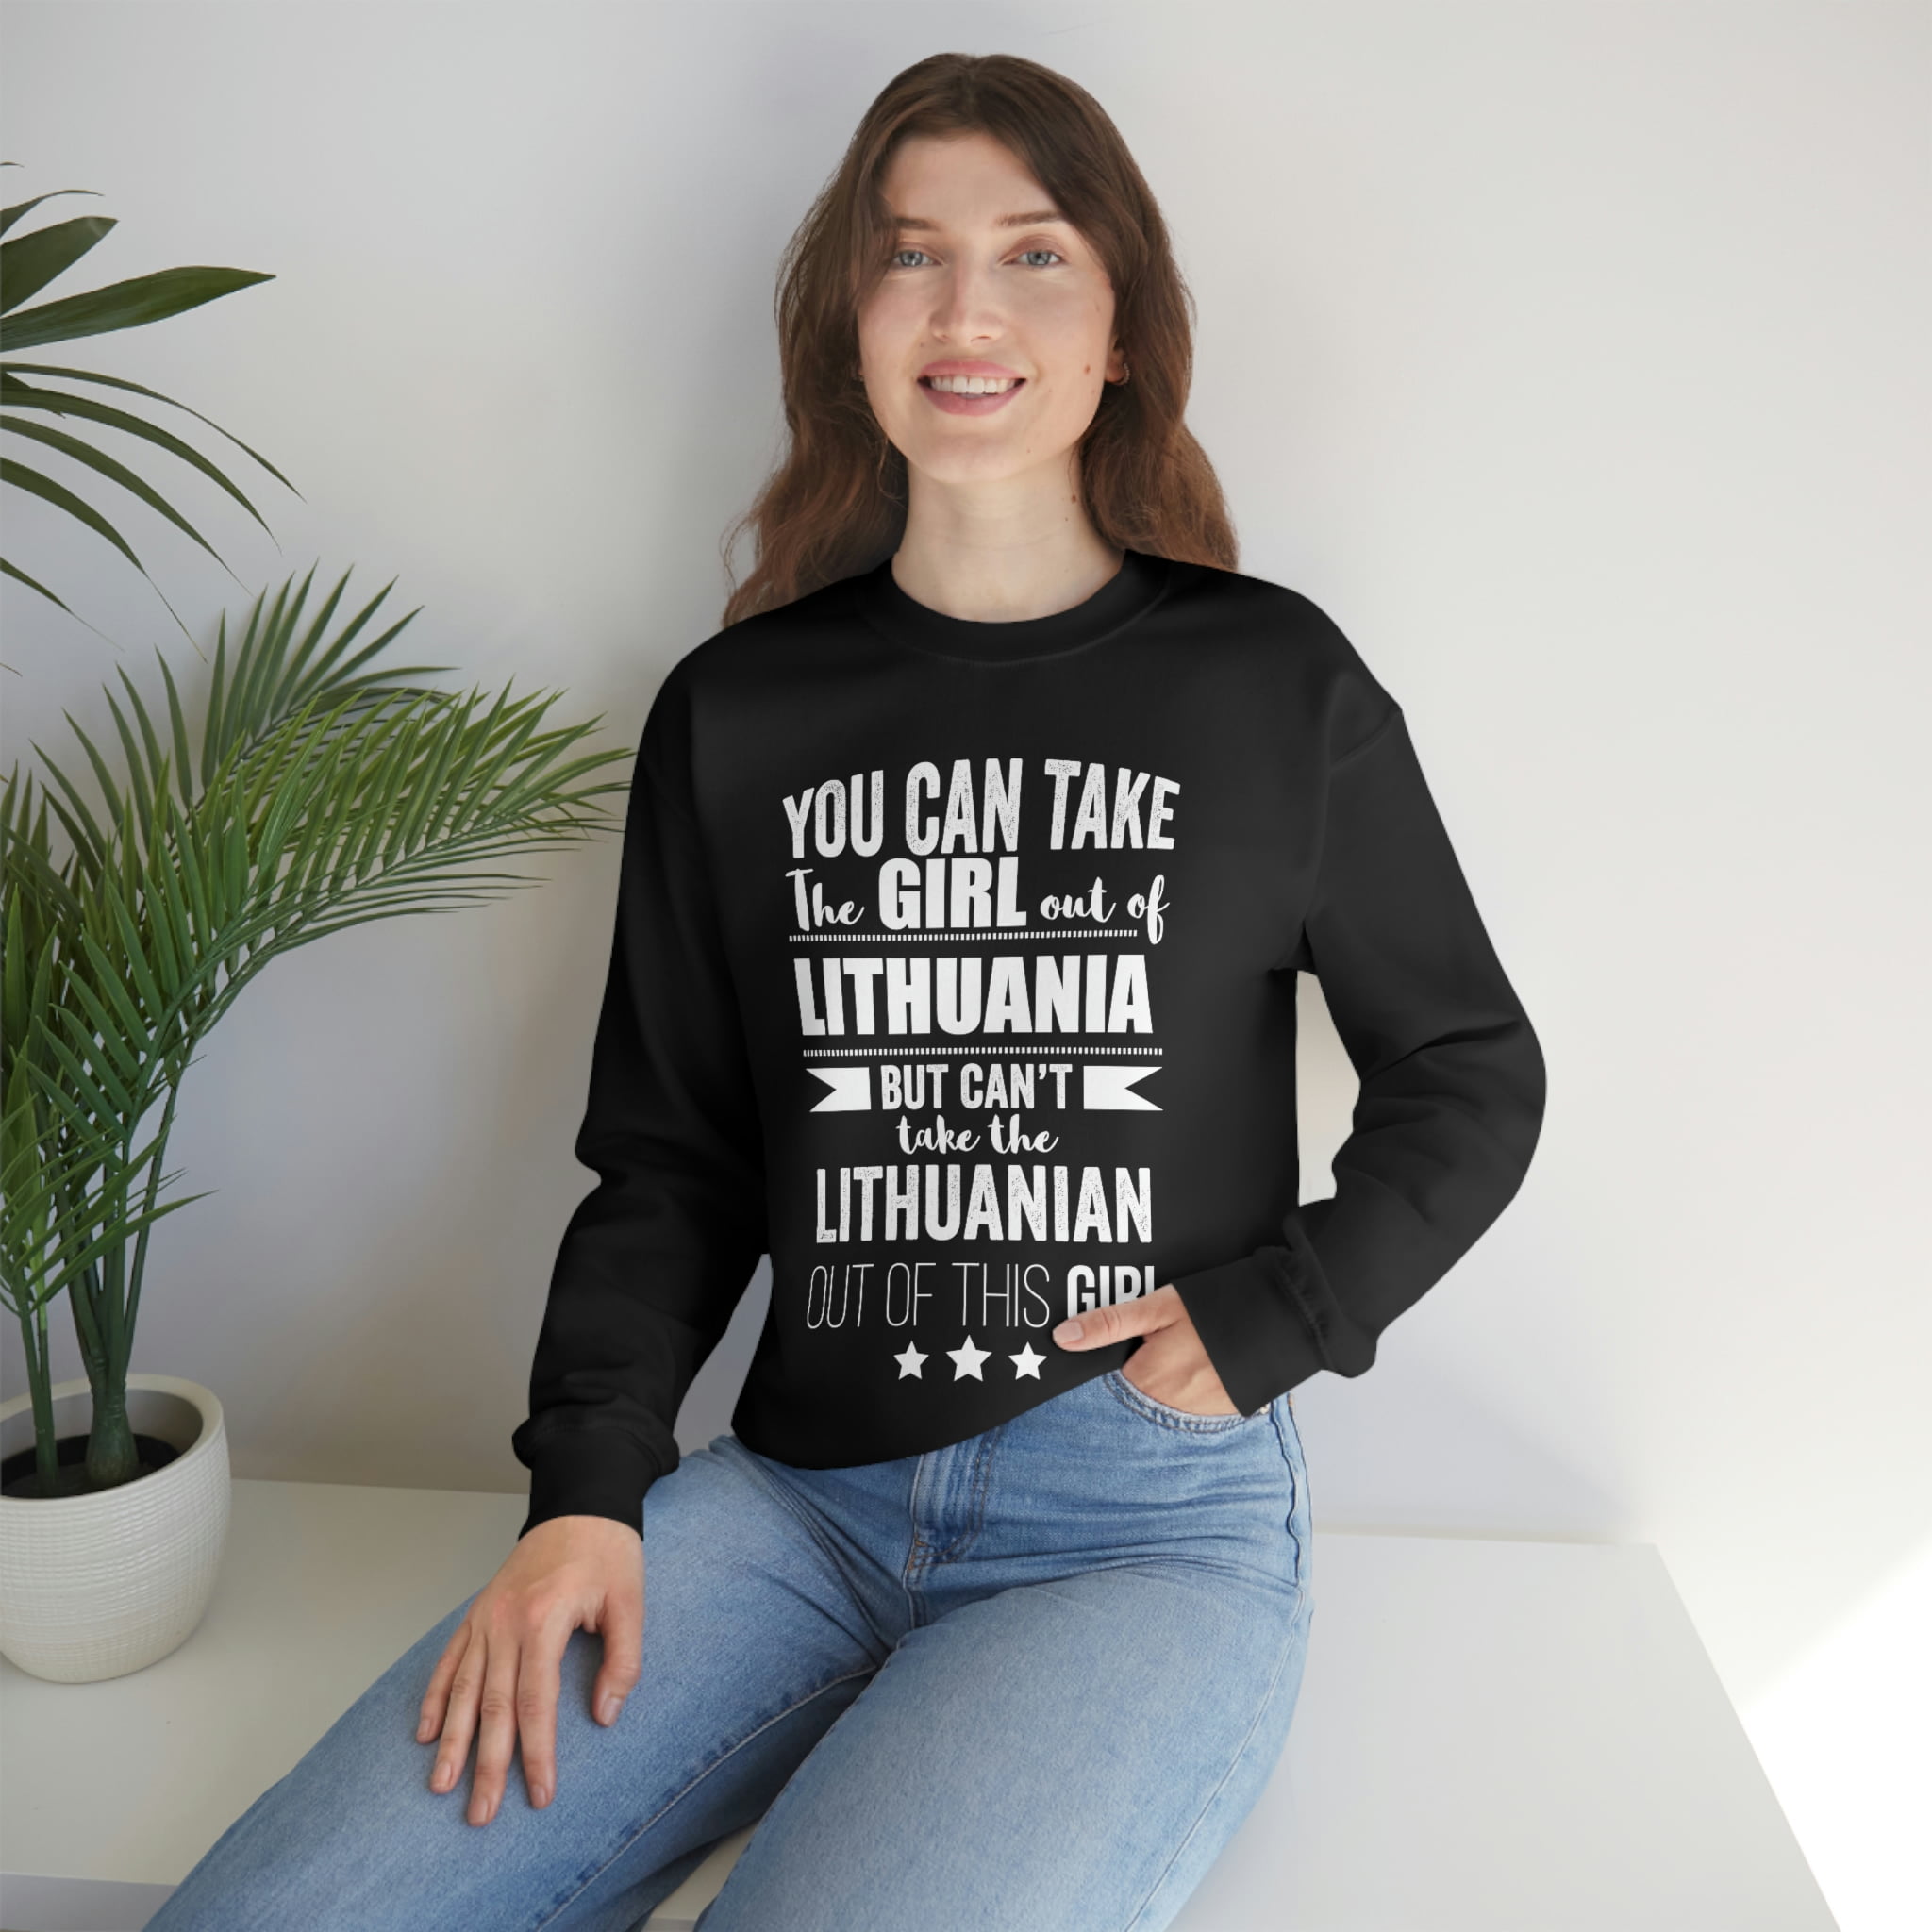 Can't Lithuanian Pride out of Girl Unisex Sweatshirt S-2XL Lithuania -